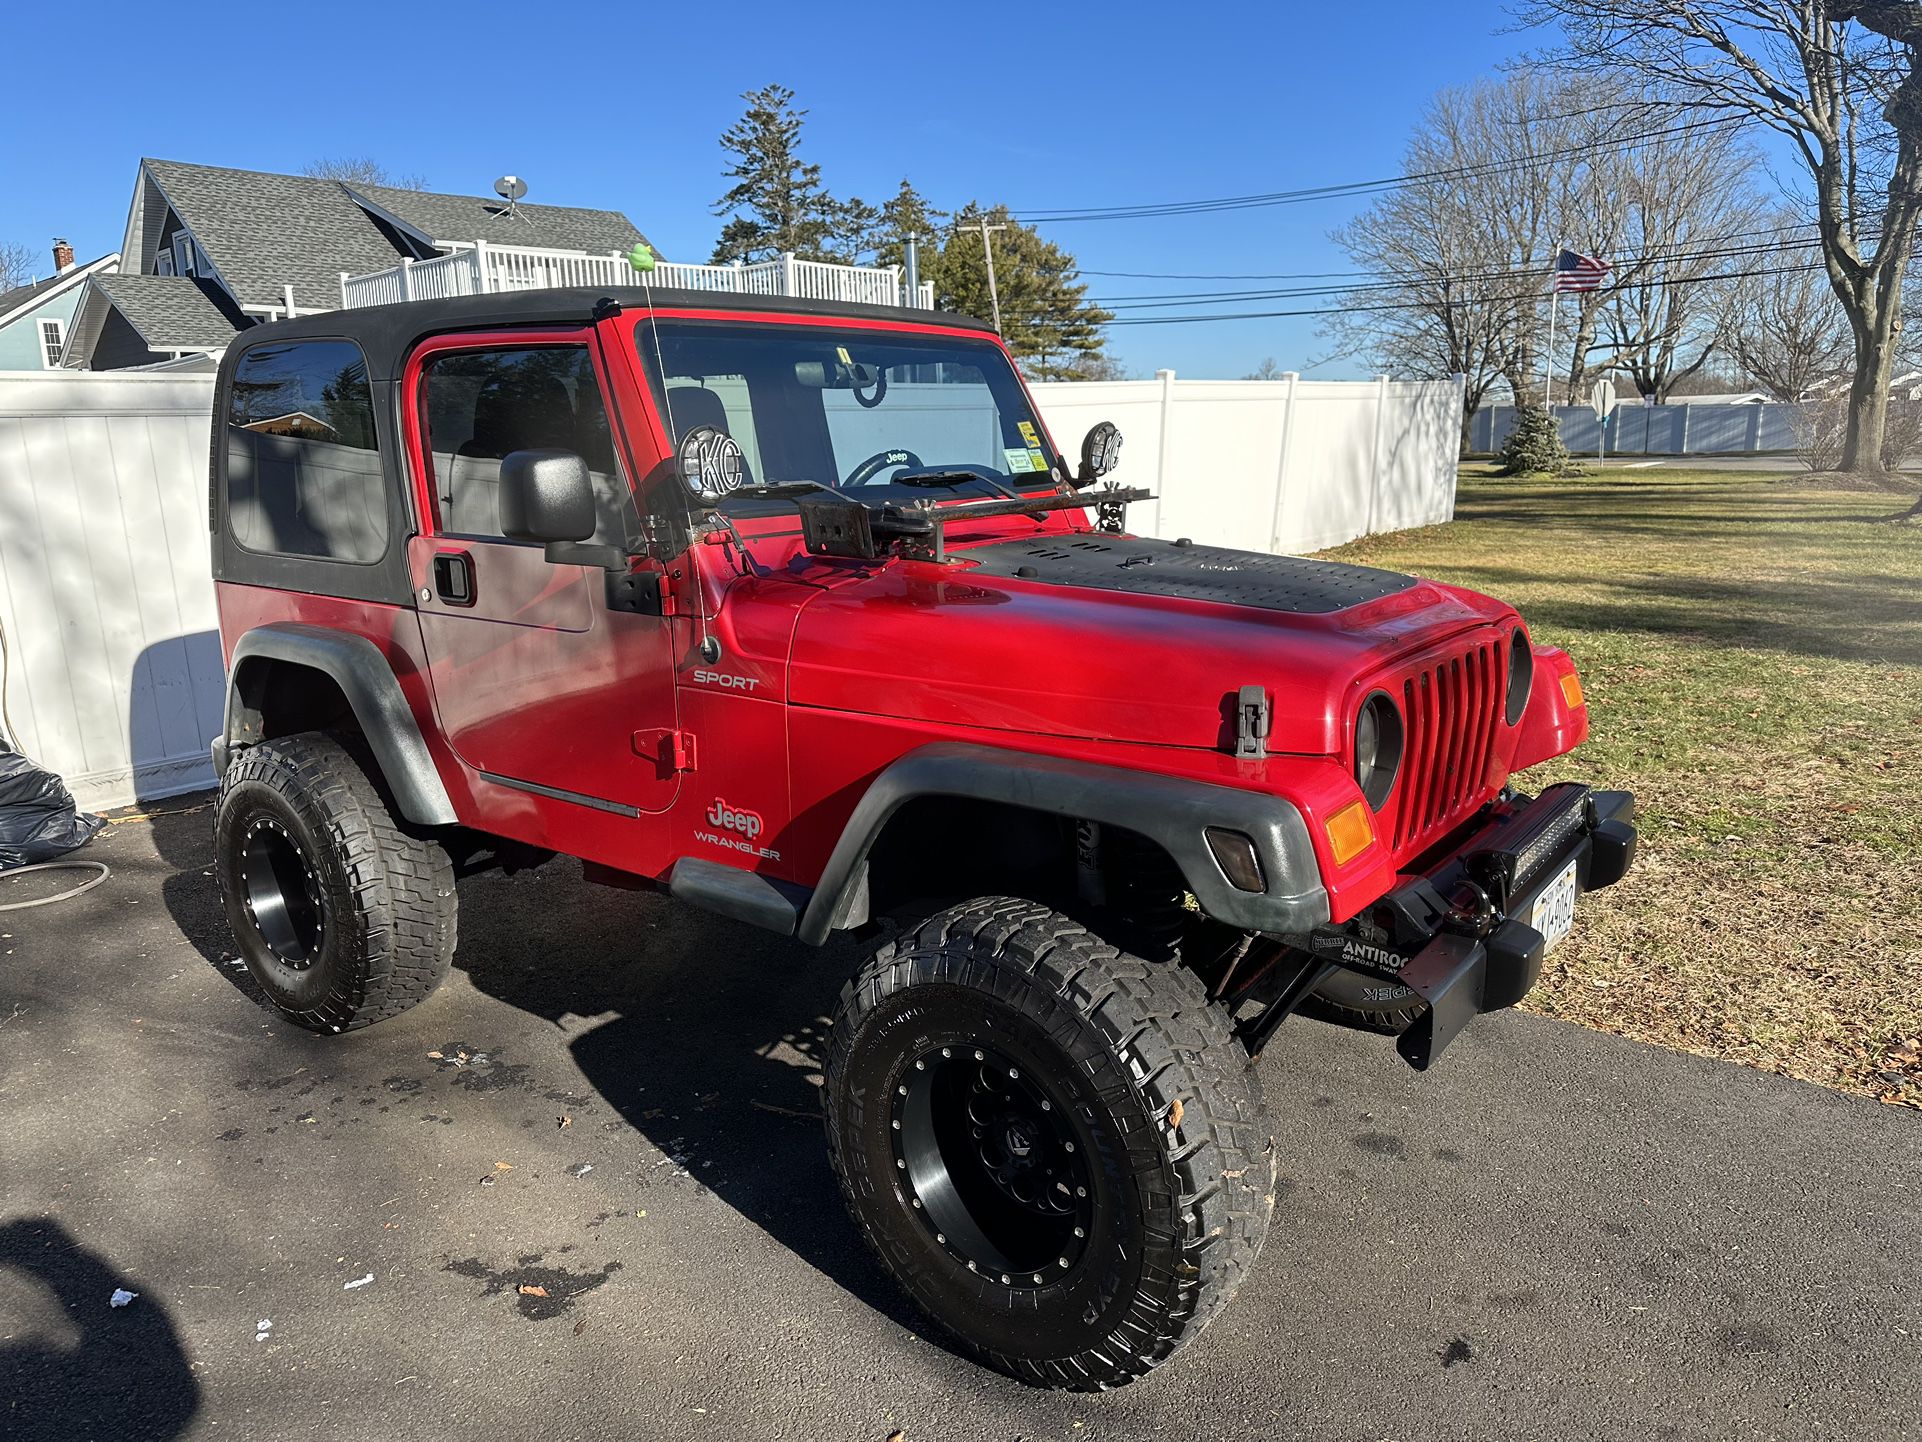 2005 Jeep Wrangler for Sale in East Patchogue, NY - OfferUp